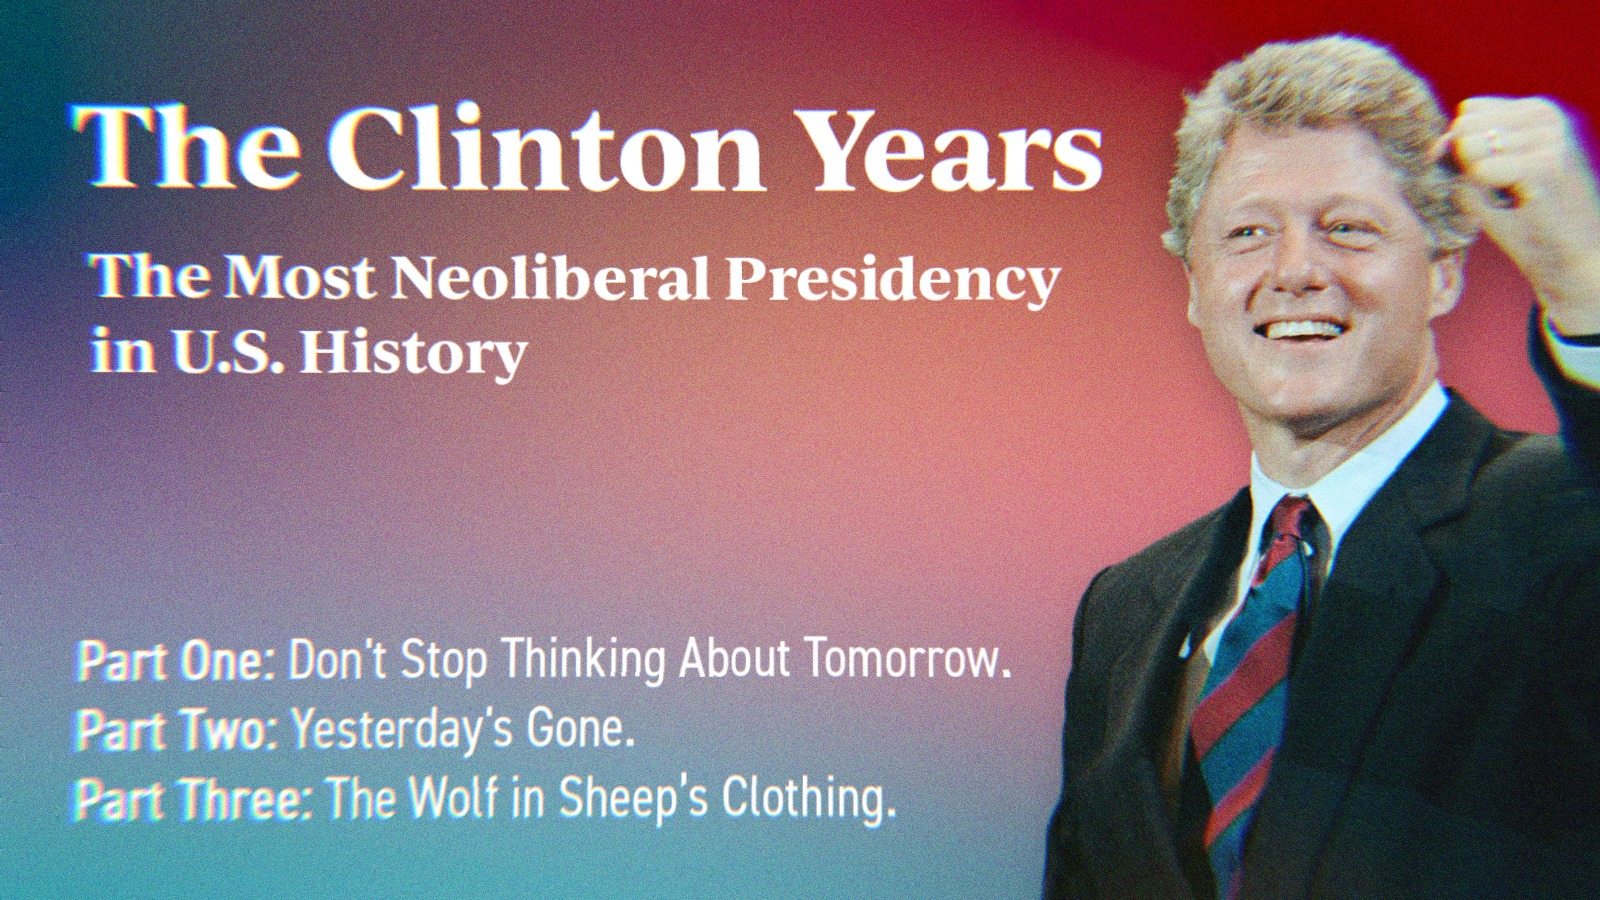 A photo of Bill Clinton alongside text that says The Clinton Years. The Most Neoliberal Presidency in U.S. History. Part One- Don’t Stop Thinking About Tomorrow. Part Two- Yesterday’s Gone. Part Three- The Wolf in Sheep’s Clothing.